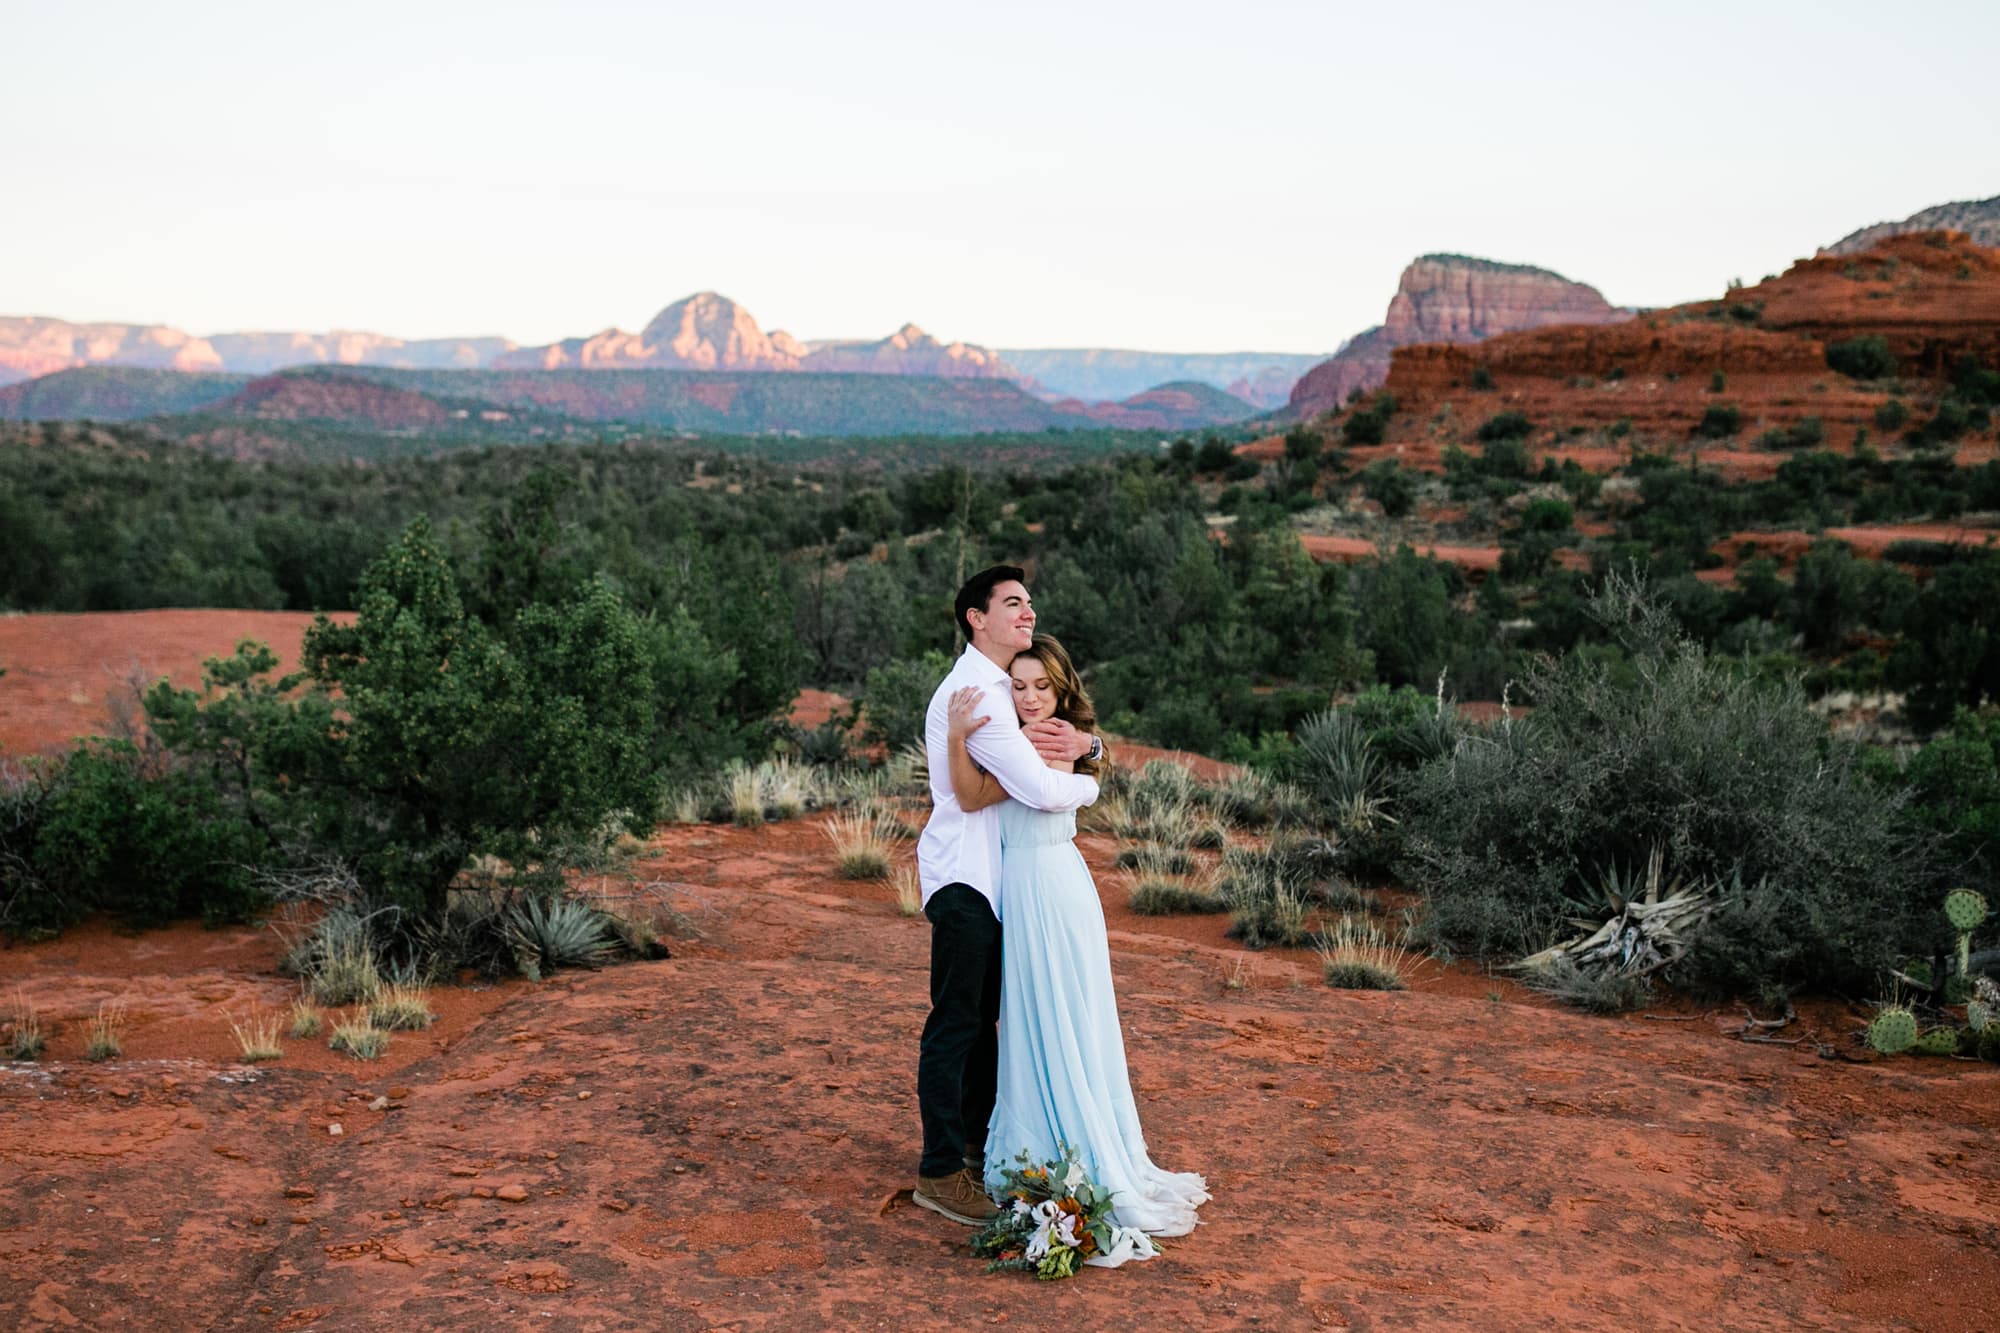 Newly married, the bride and groom hug with the red rock mountains in the distance.